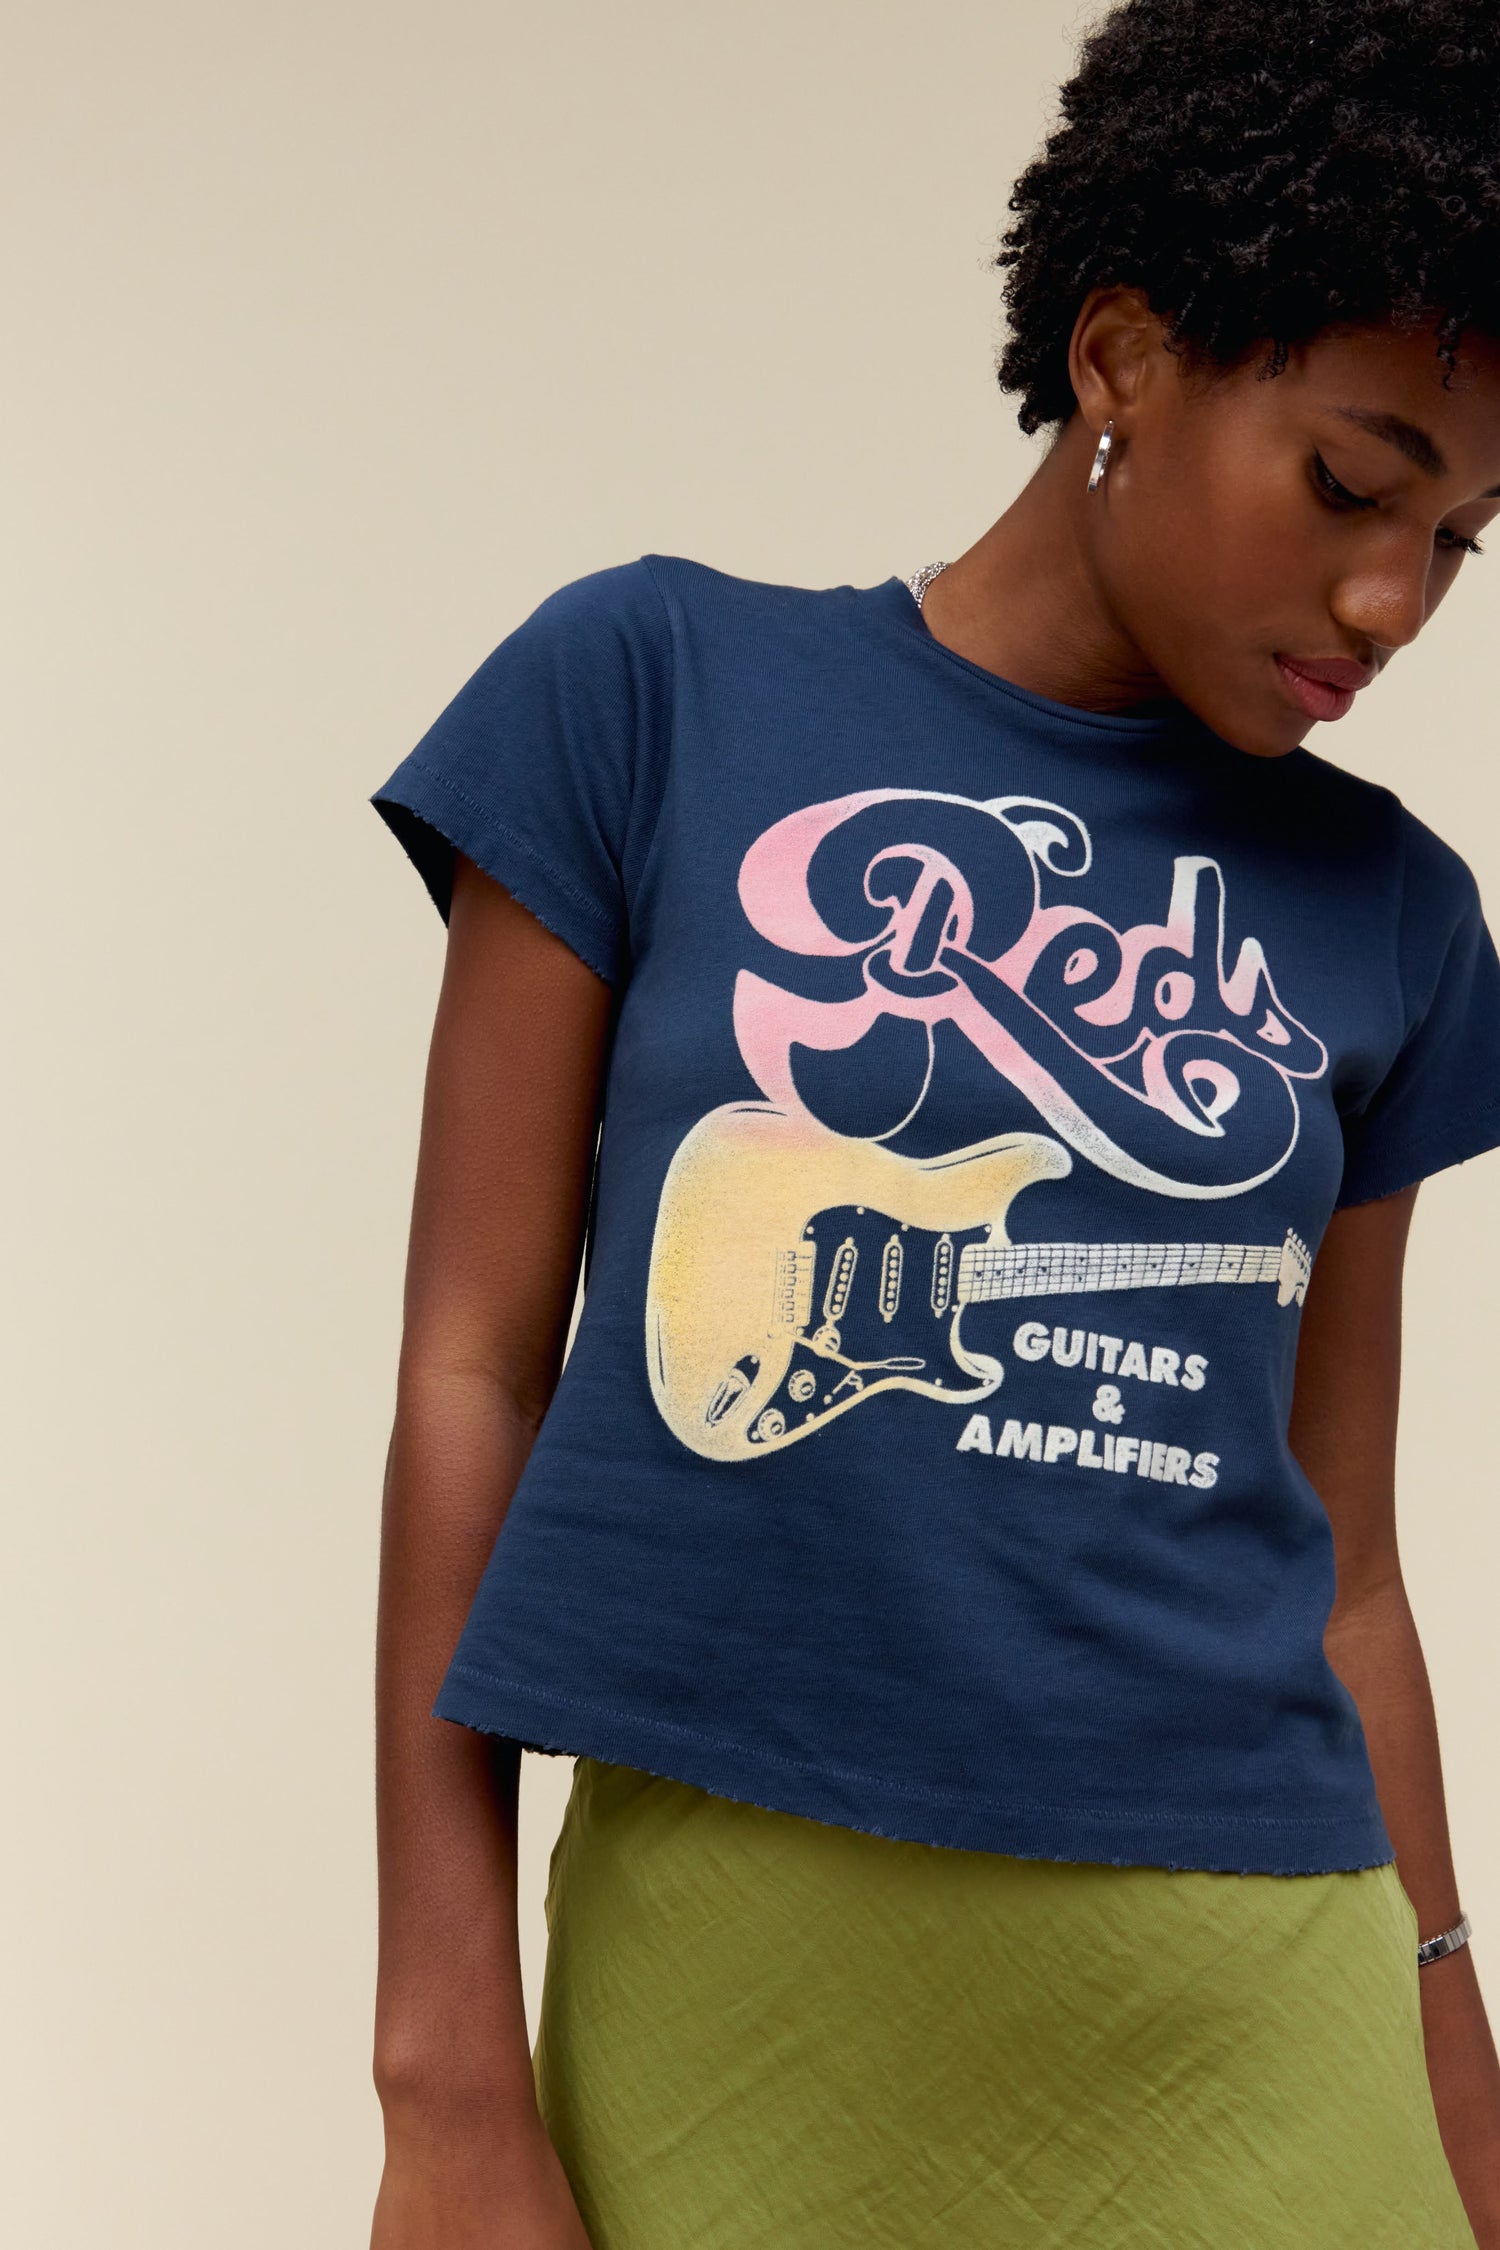 A model featuring a navy tee stamped with red, guitars, & amplifiers and a graphic of a guitar on the middle.